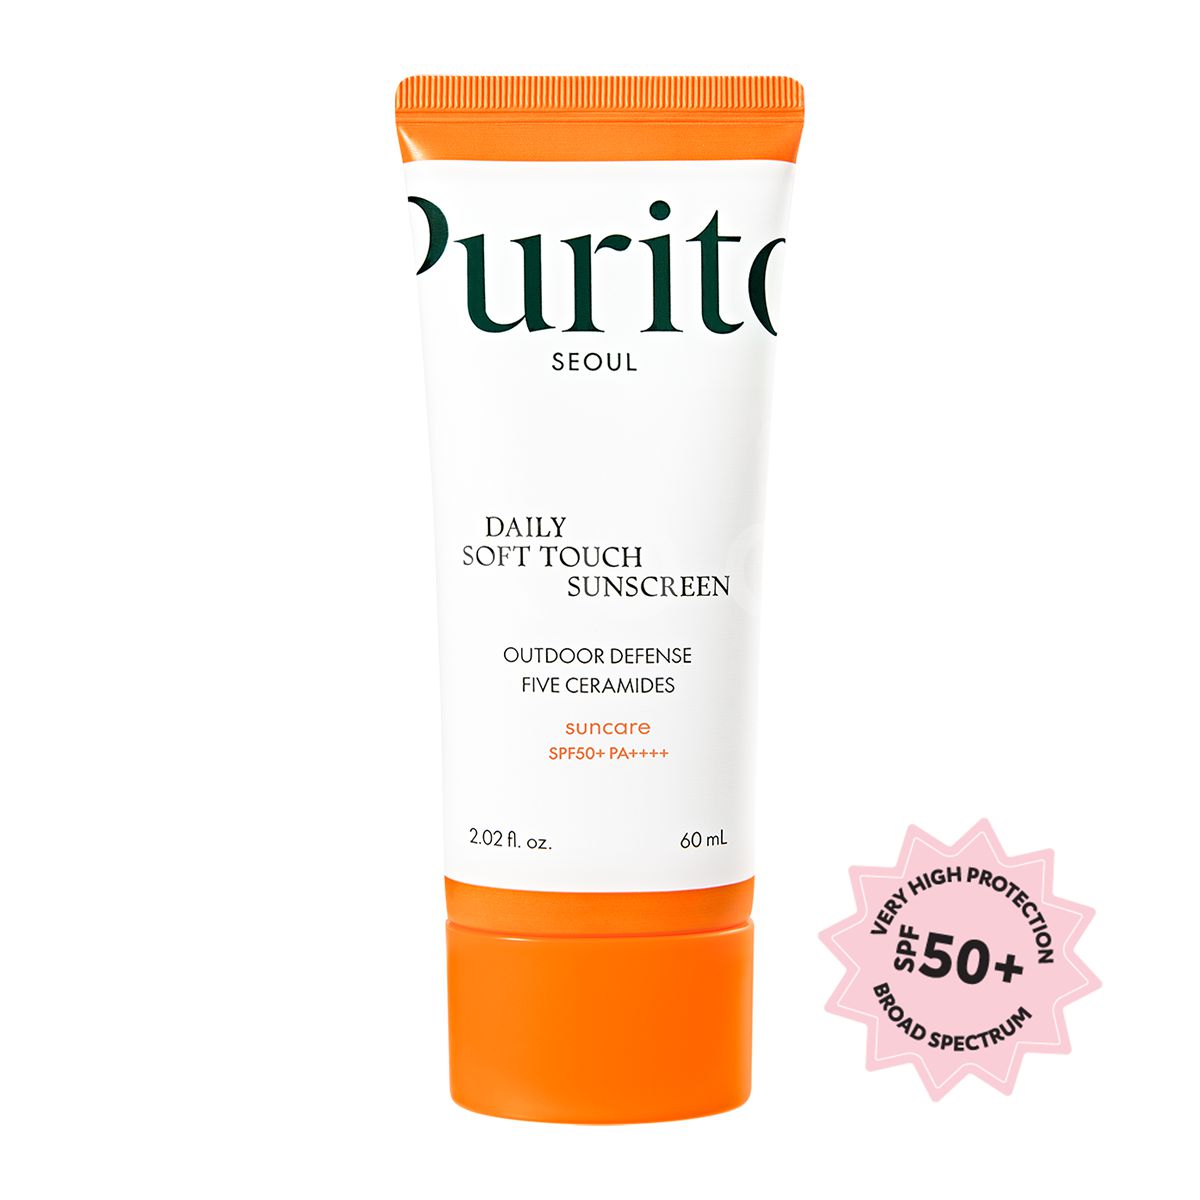 Daily Soft Touch Sunscreen SPF50+ Broad Spectrum